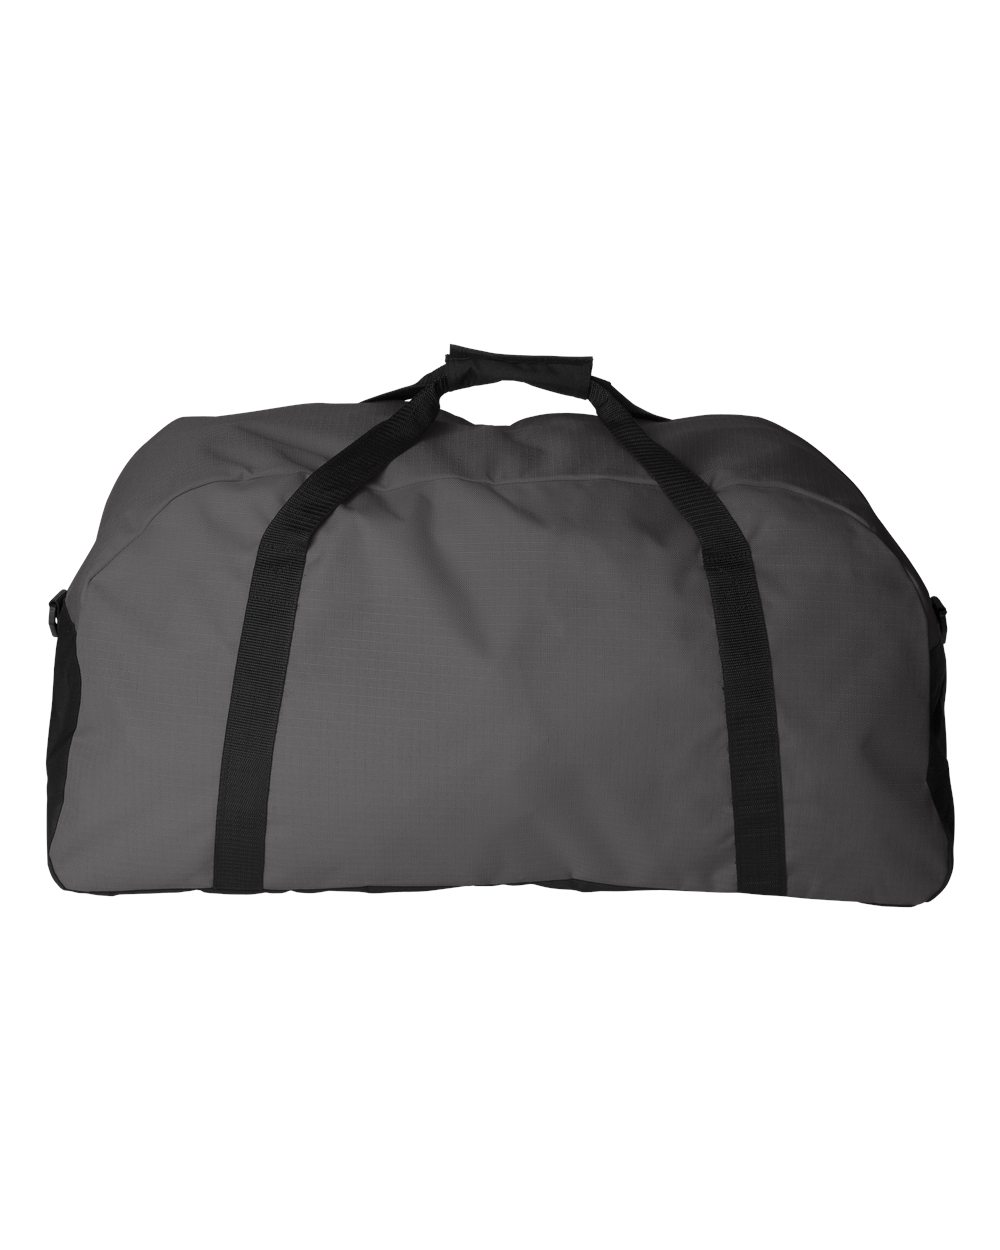 Augusta 1703A Large Ripstop Duffel Bag - Graphite & Black- ALL - image 3 of 5